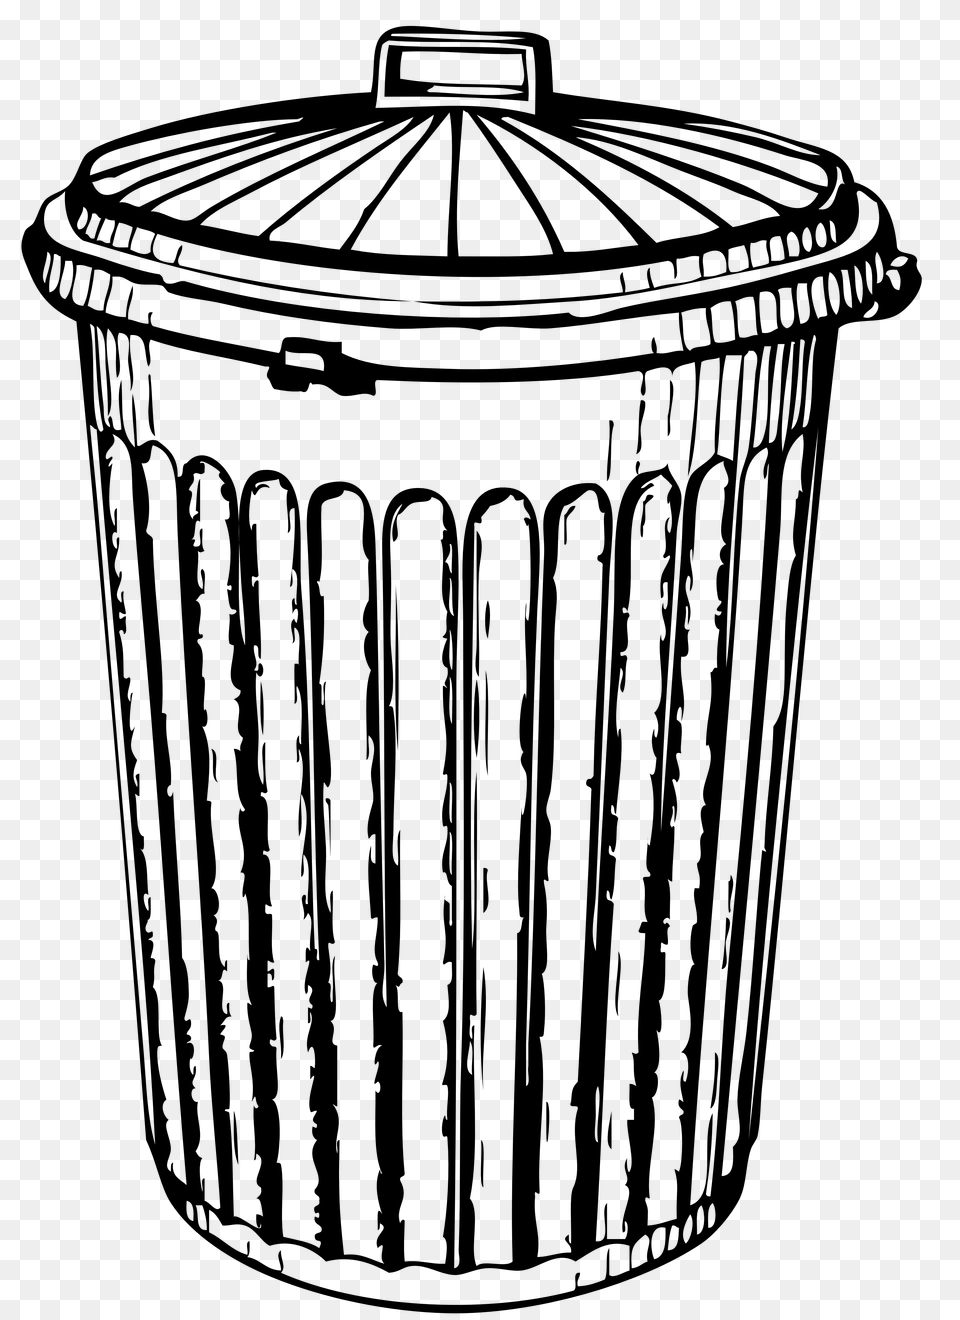 Trash Can Clipart For Web Design Clipart, Tin, Trash Can Png